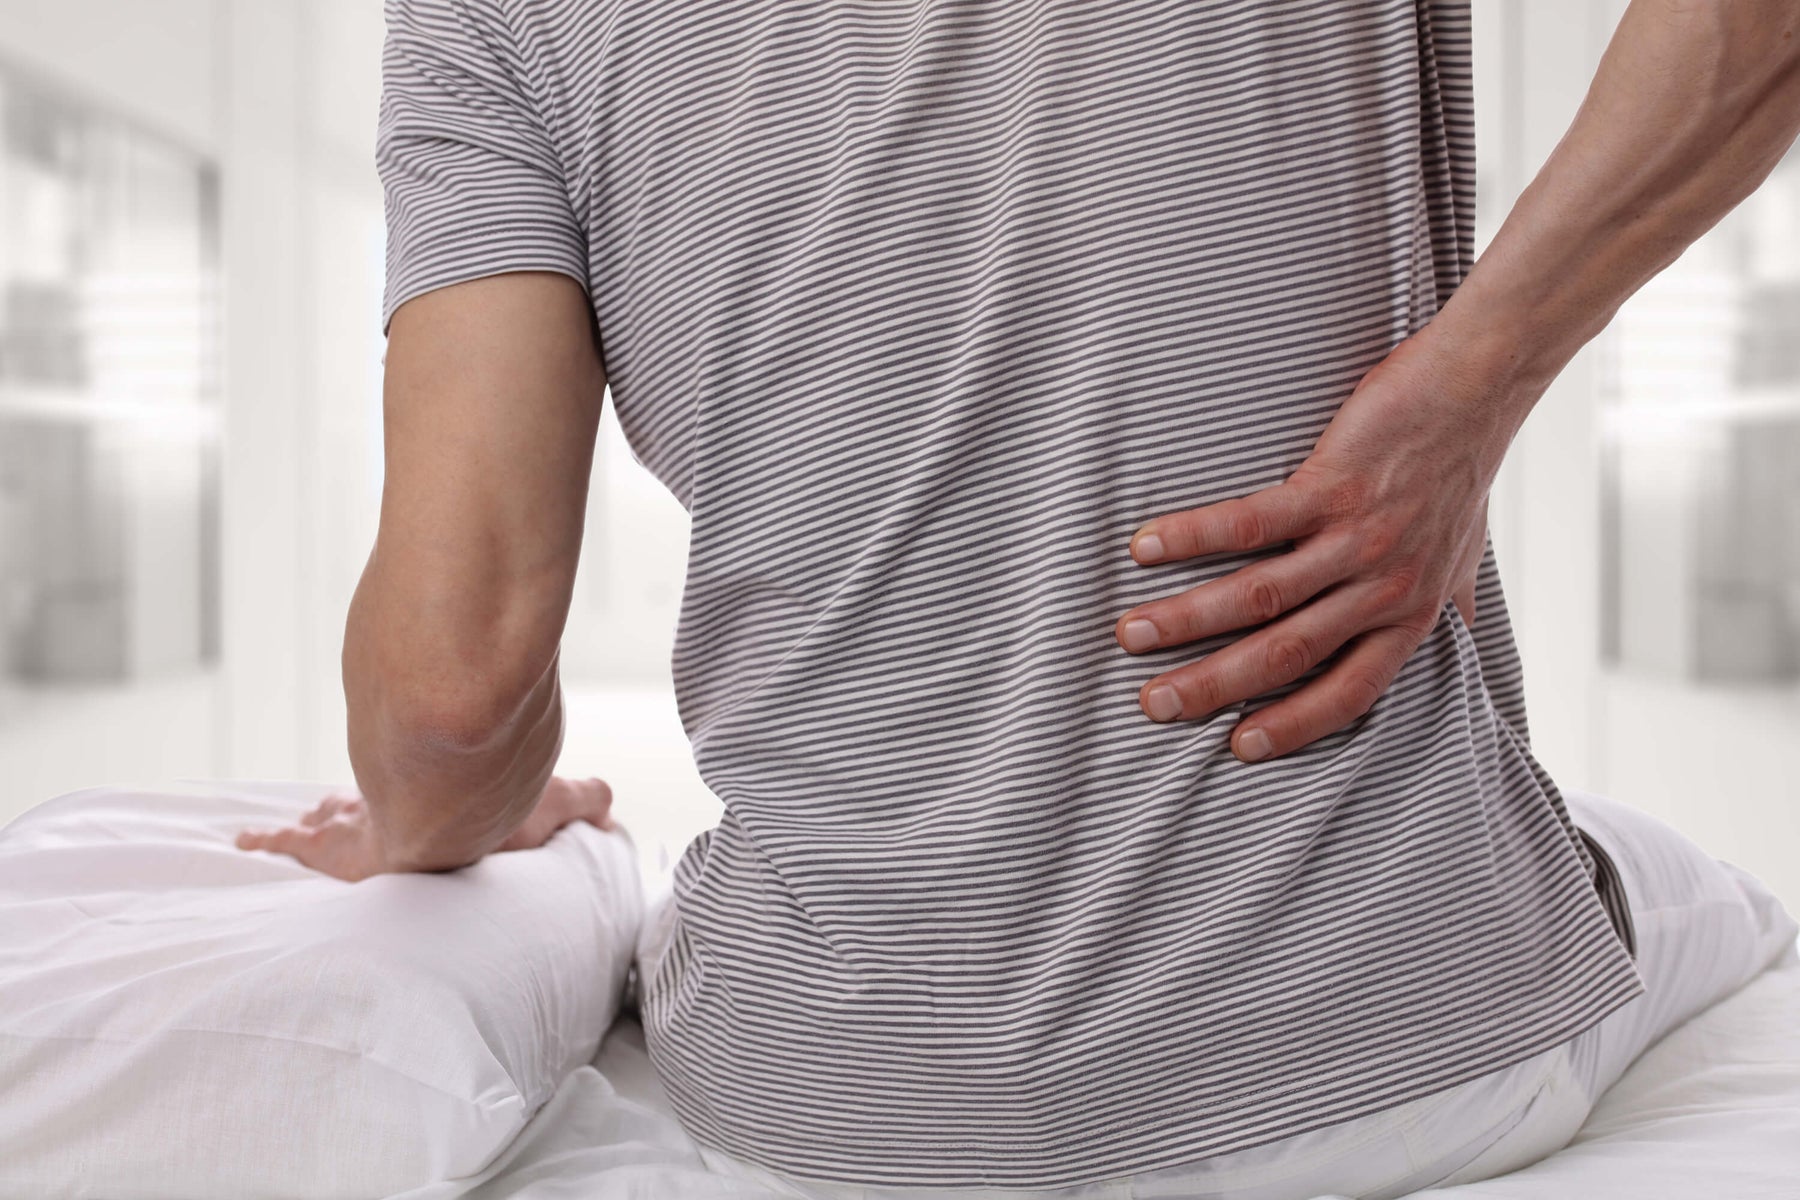 Get Drug-Free Relief for Your Back Pain